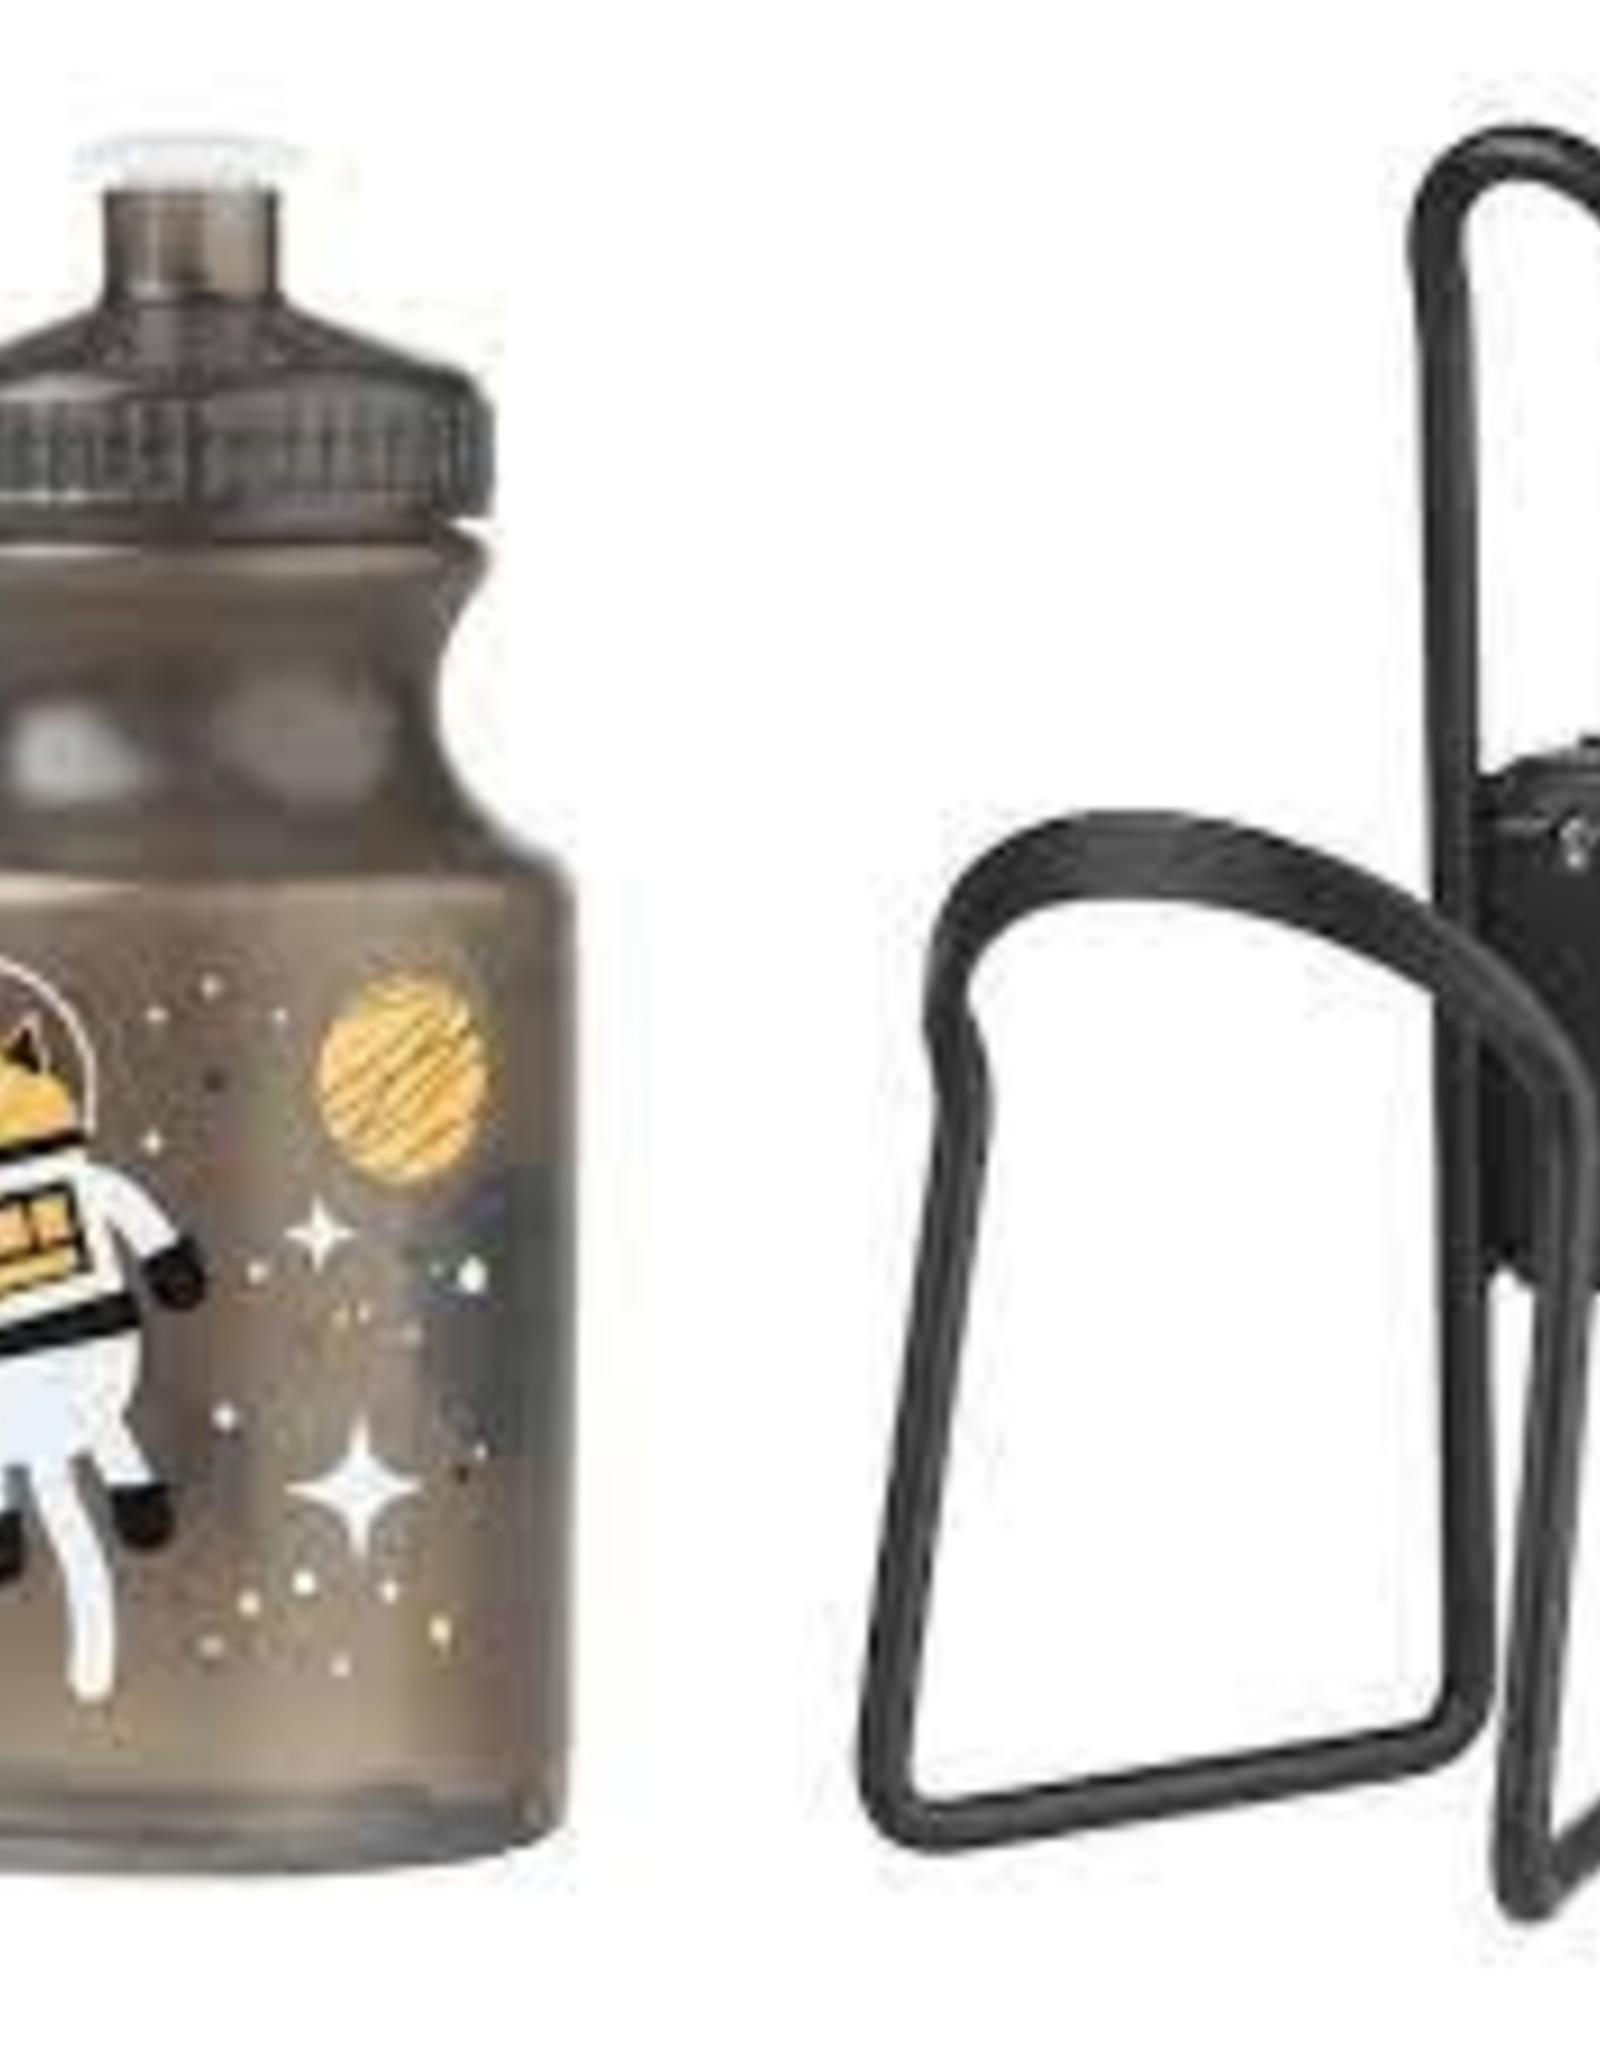 MSW Space Kitty Water Bottle and Cage Kit - Alpine Hut